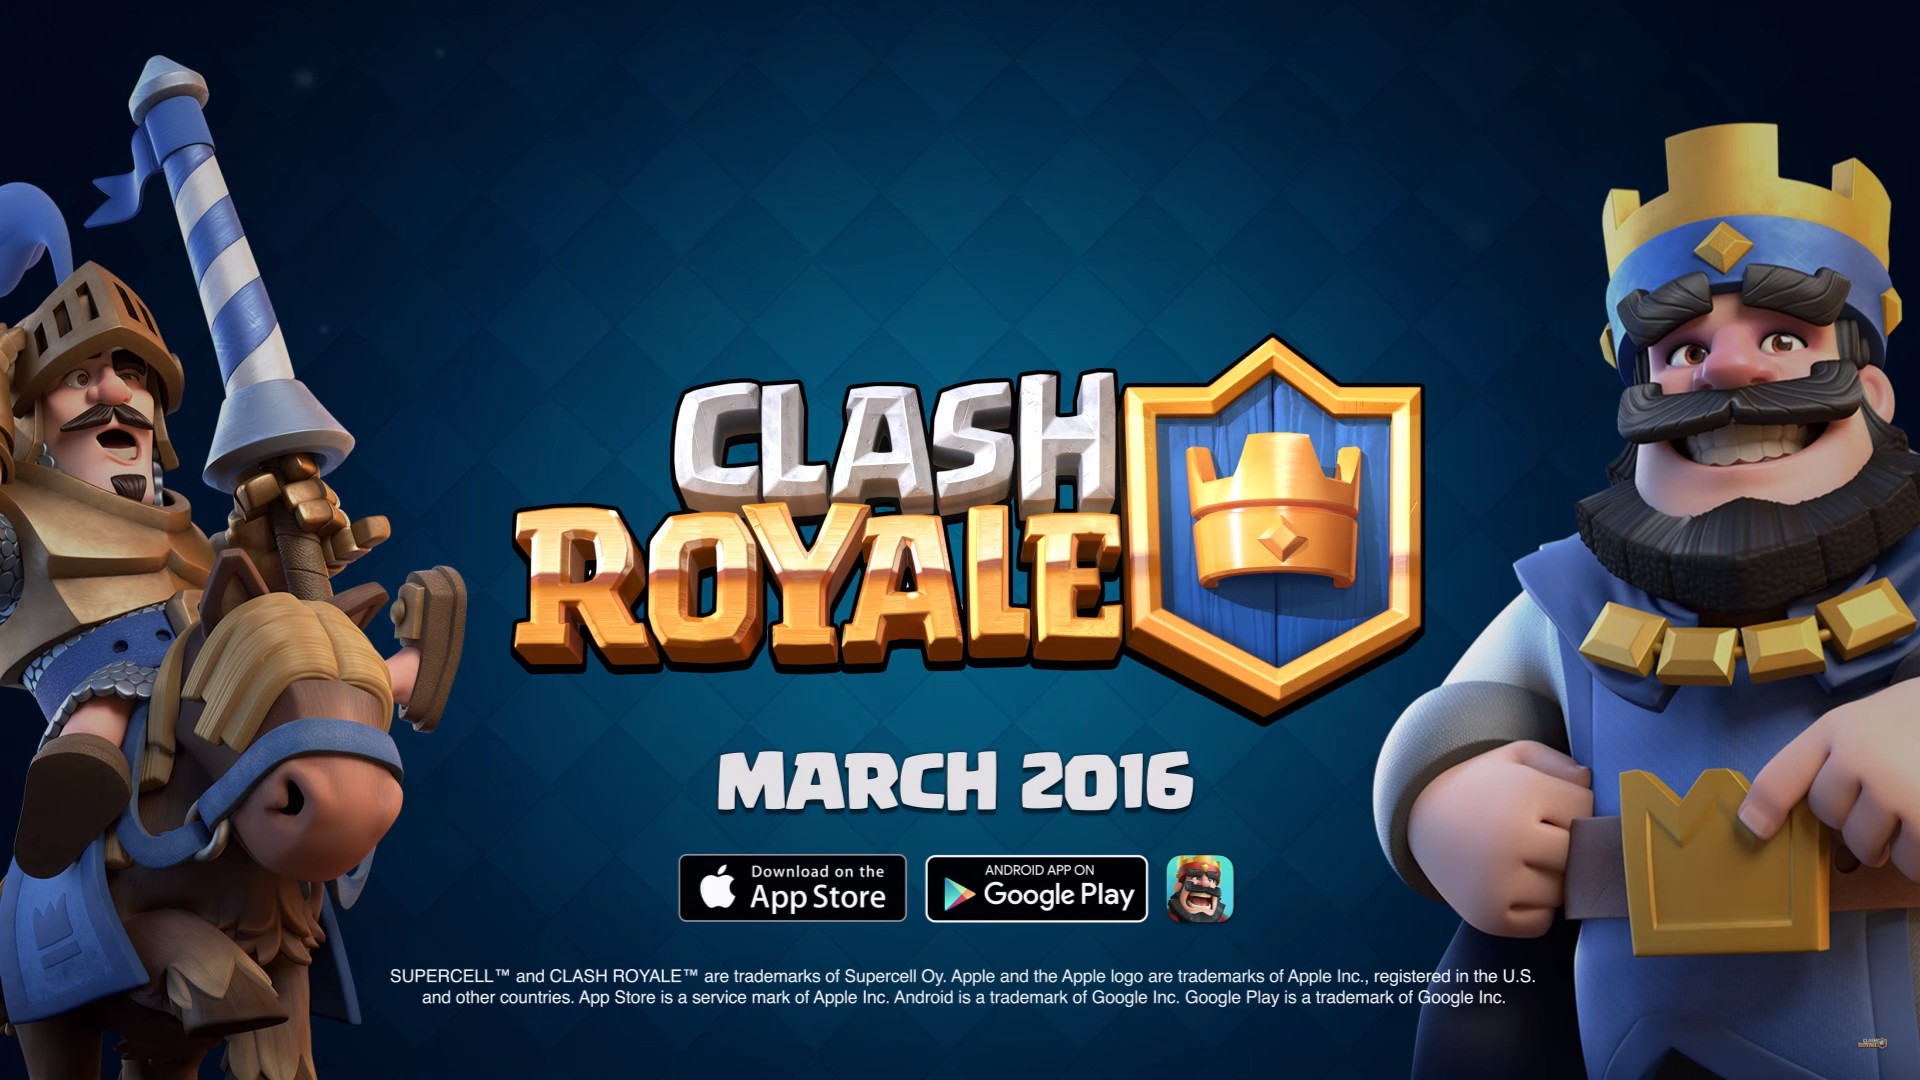 Clash Royale Strategy Game Coming to Android and iOS in March